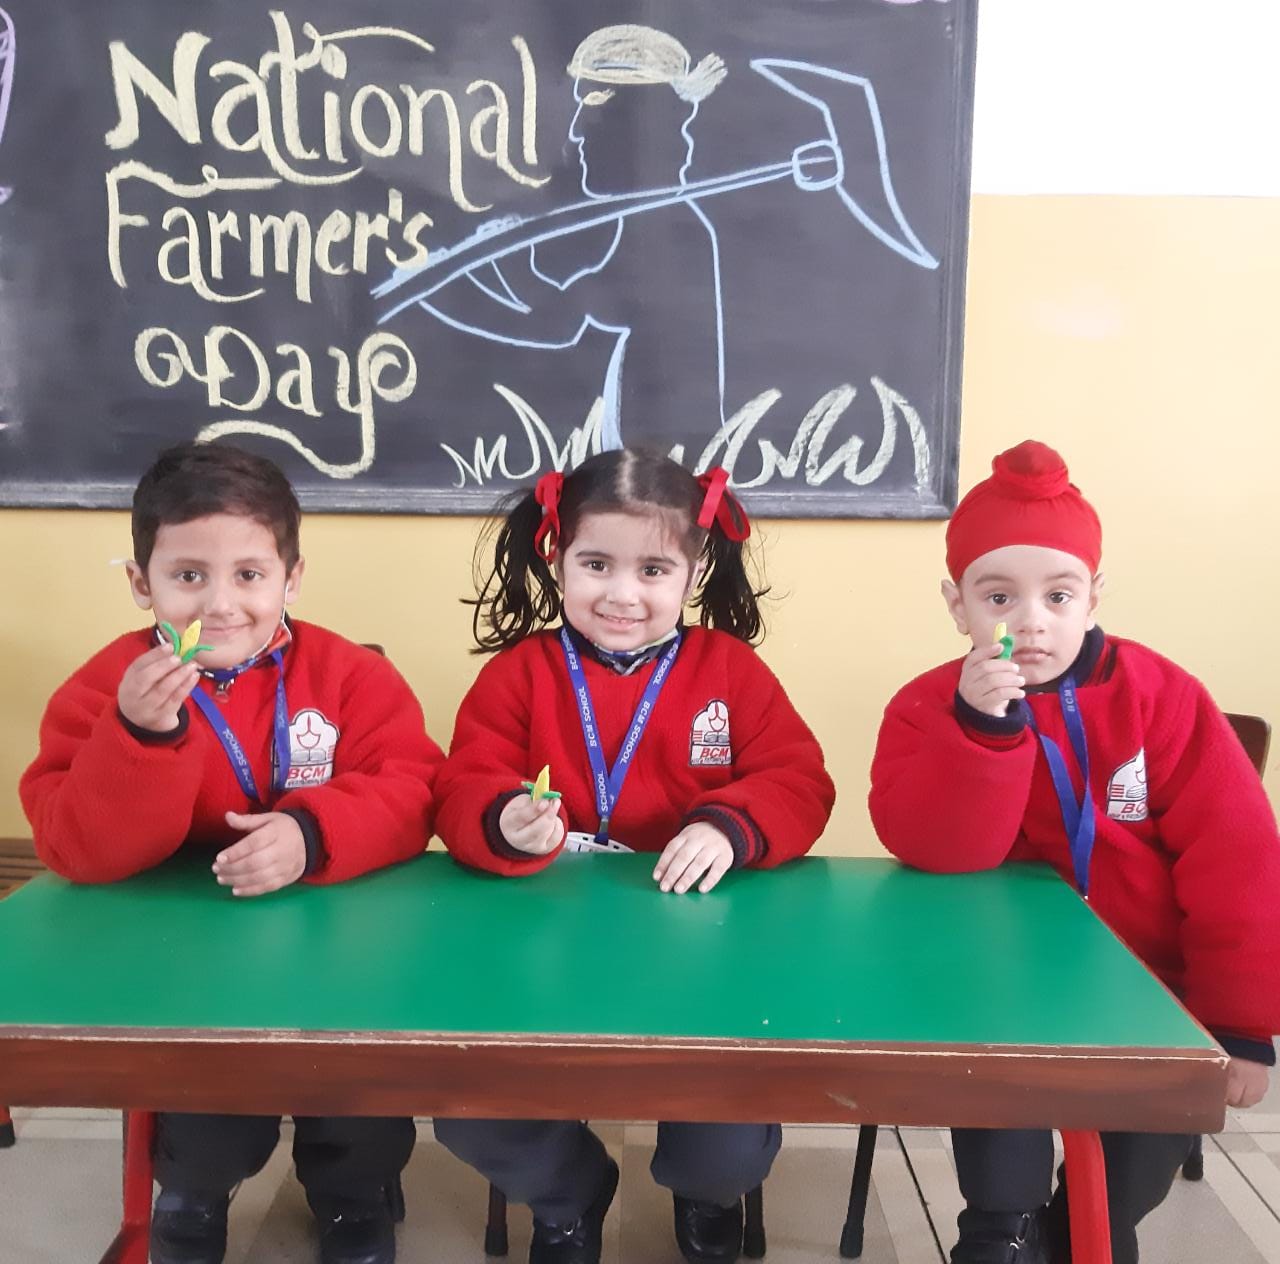 NATIONAL FARMERS DAY